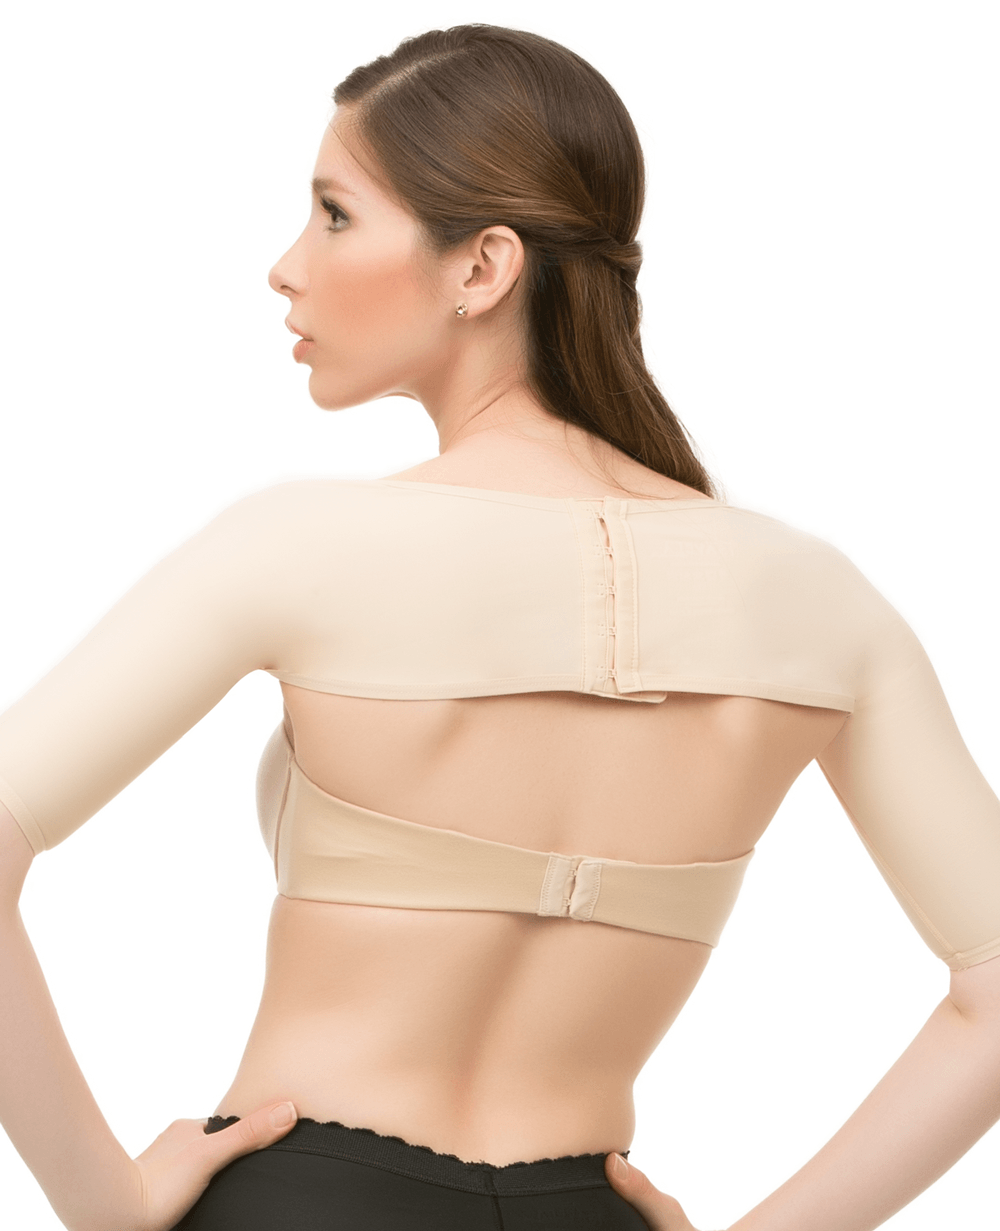 Discover the Ultimate Comfort with Isavela's Post-Op Compression Body